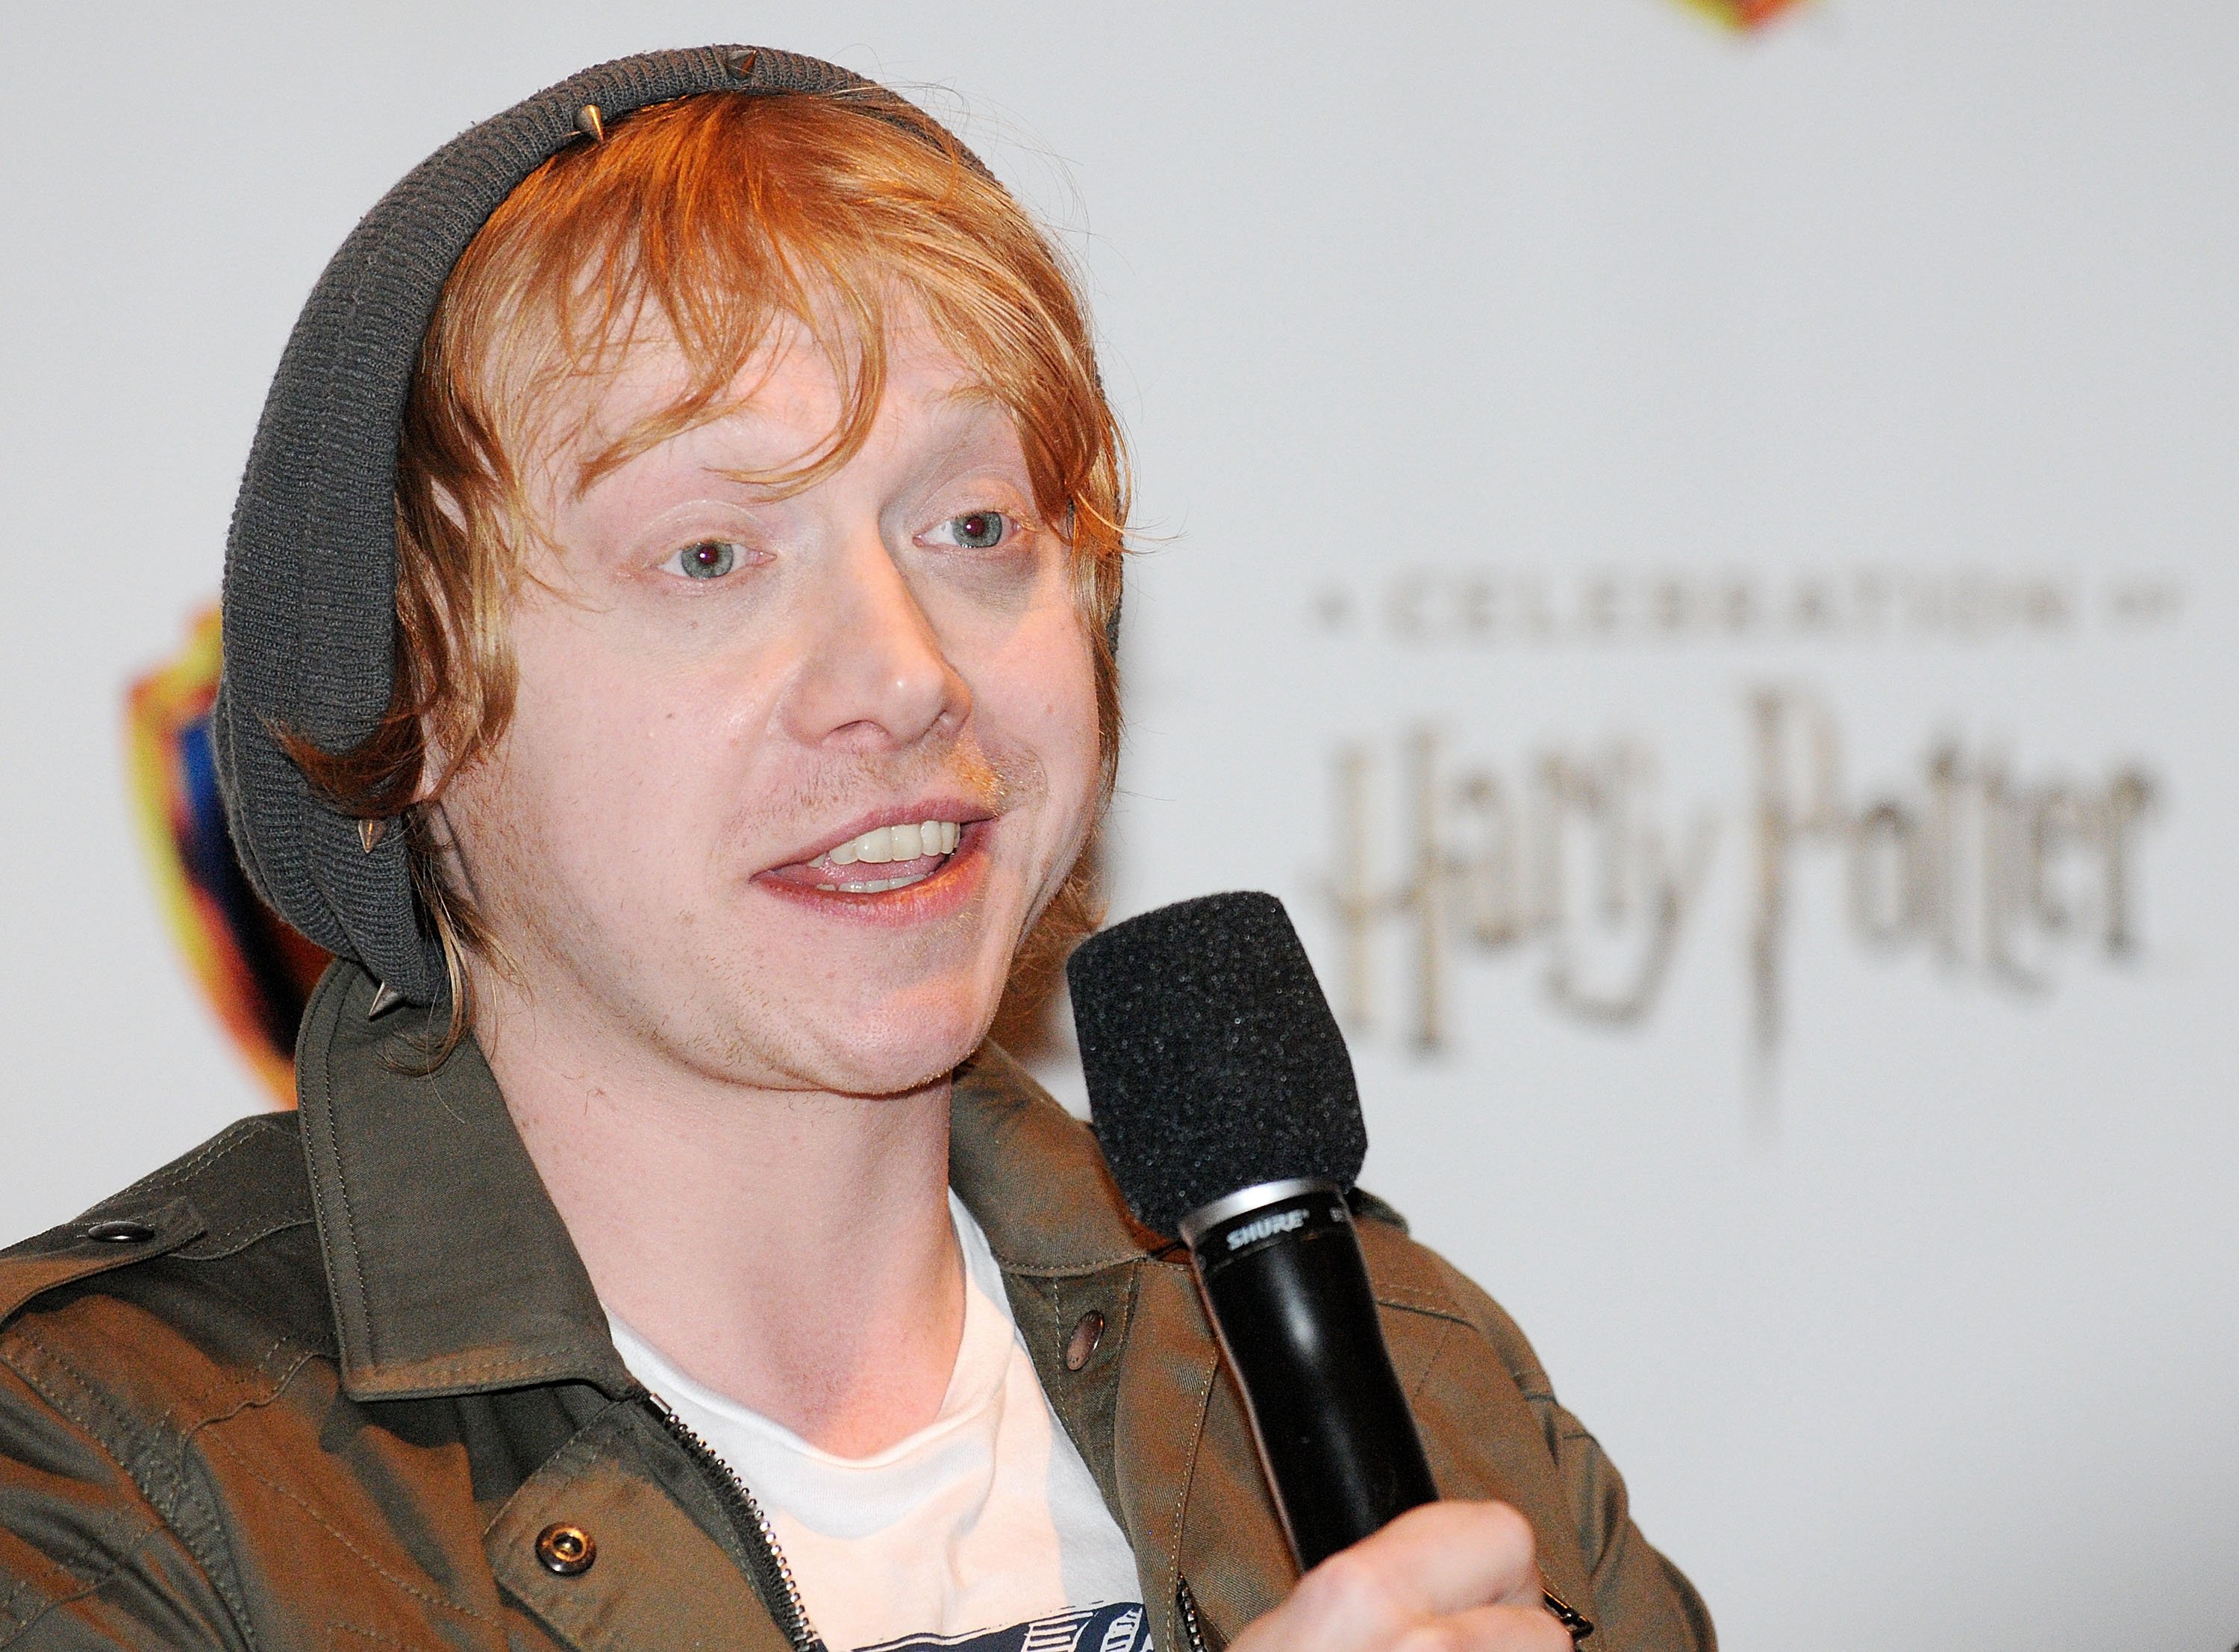 Rupert Grint attends the 3rd Annual Celebration Of Harry Potter at Universal Orlando on January 29, 2016 in Orlando, Florida.